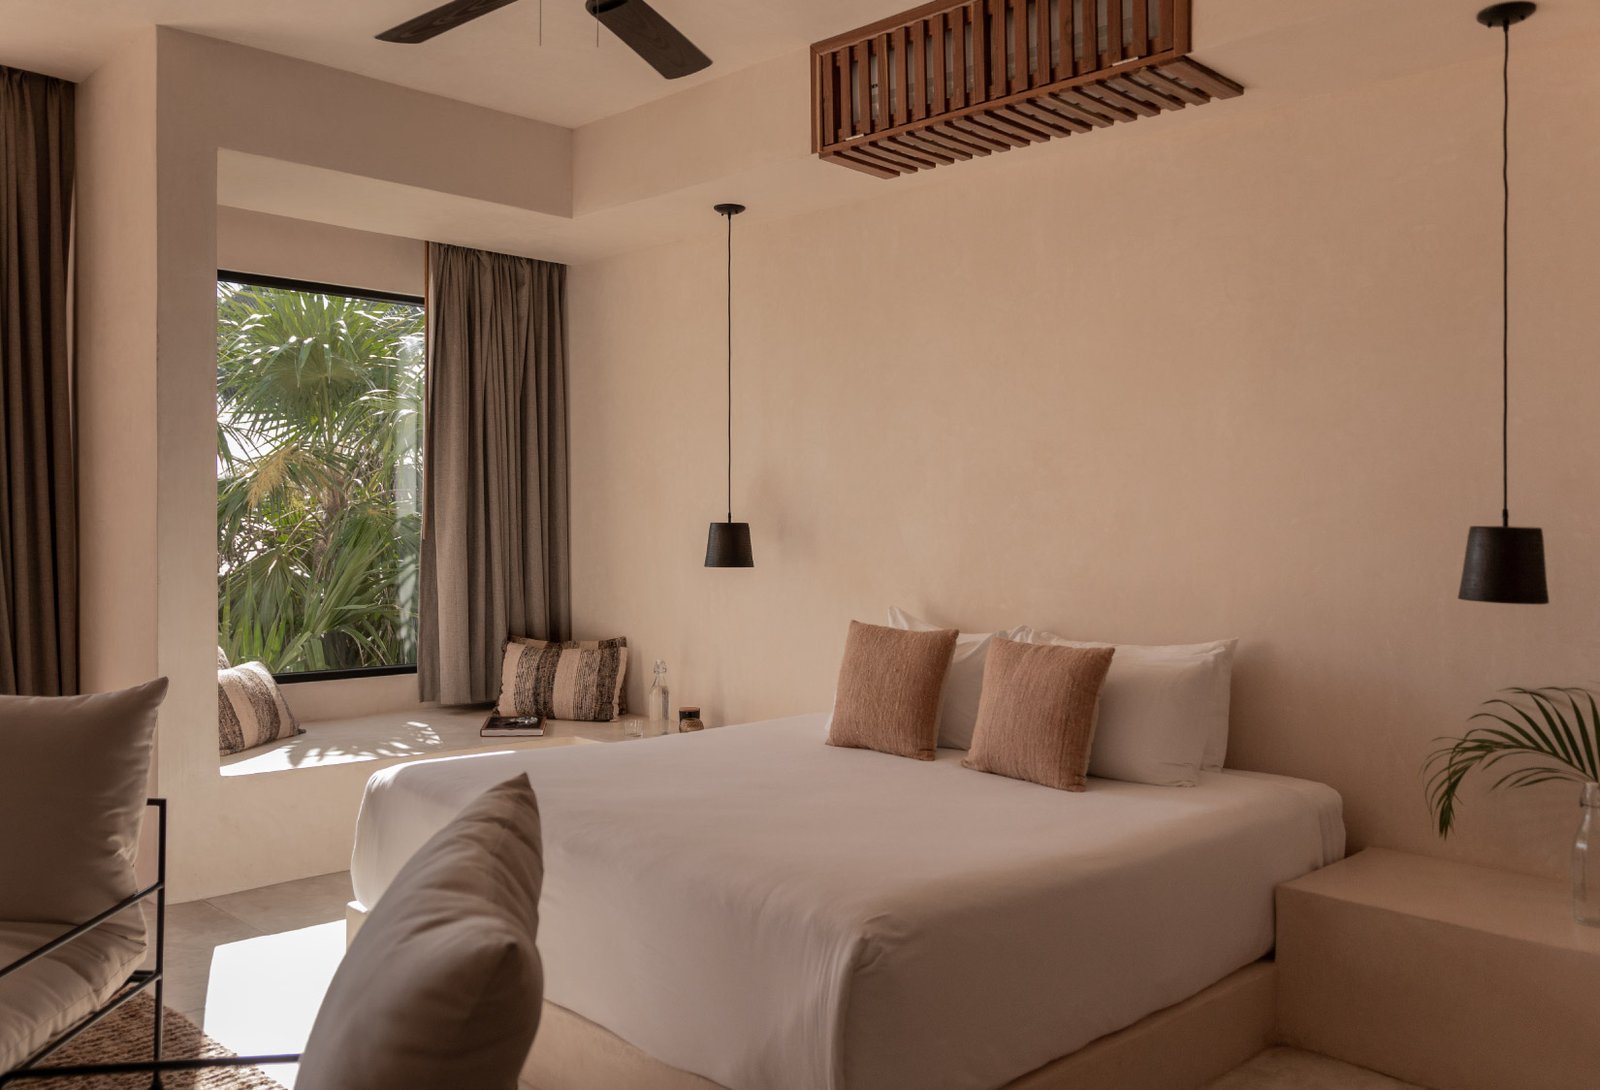 Beautiful spacious bedroom of the villa Chechén Suite in Tulum, Mexico